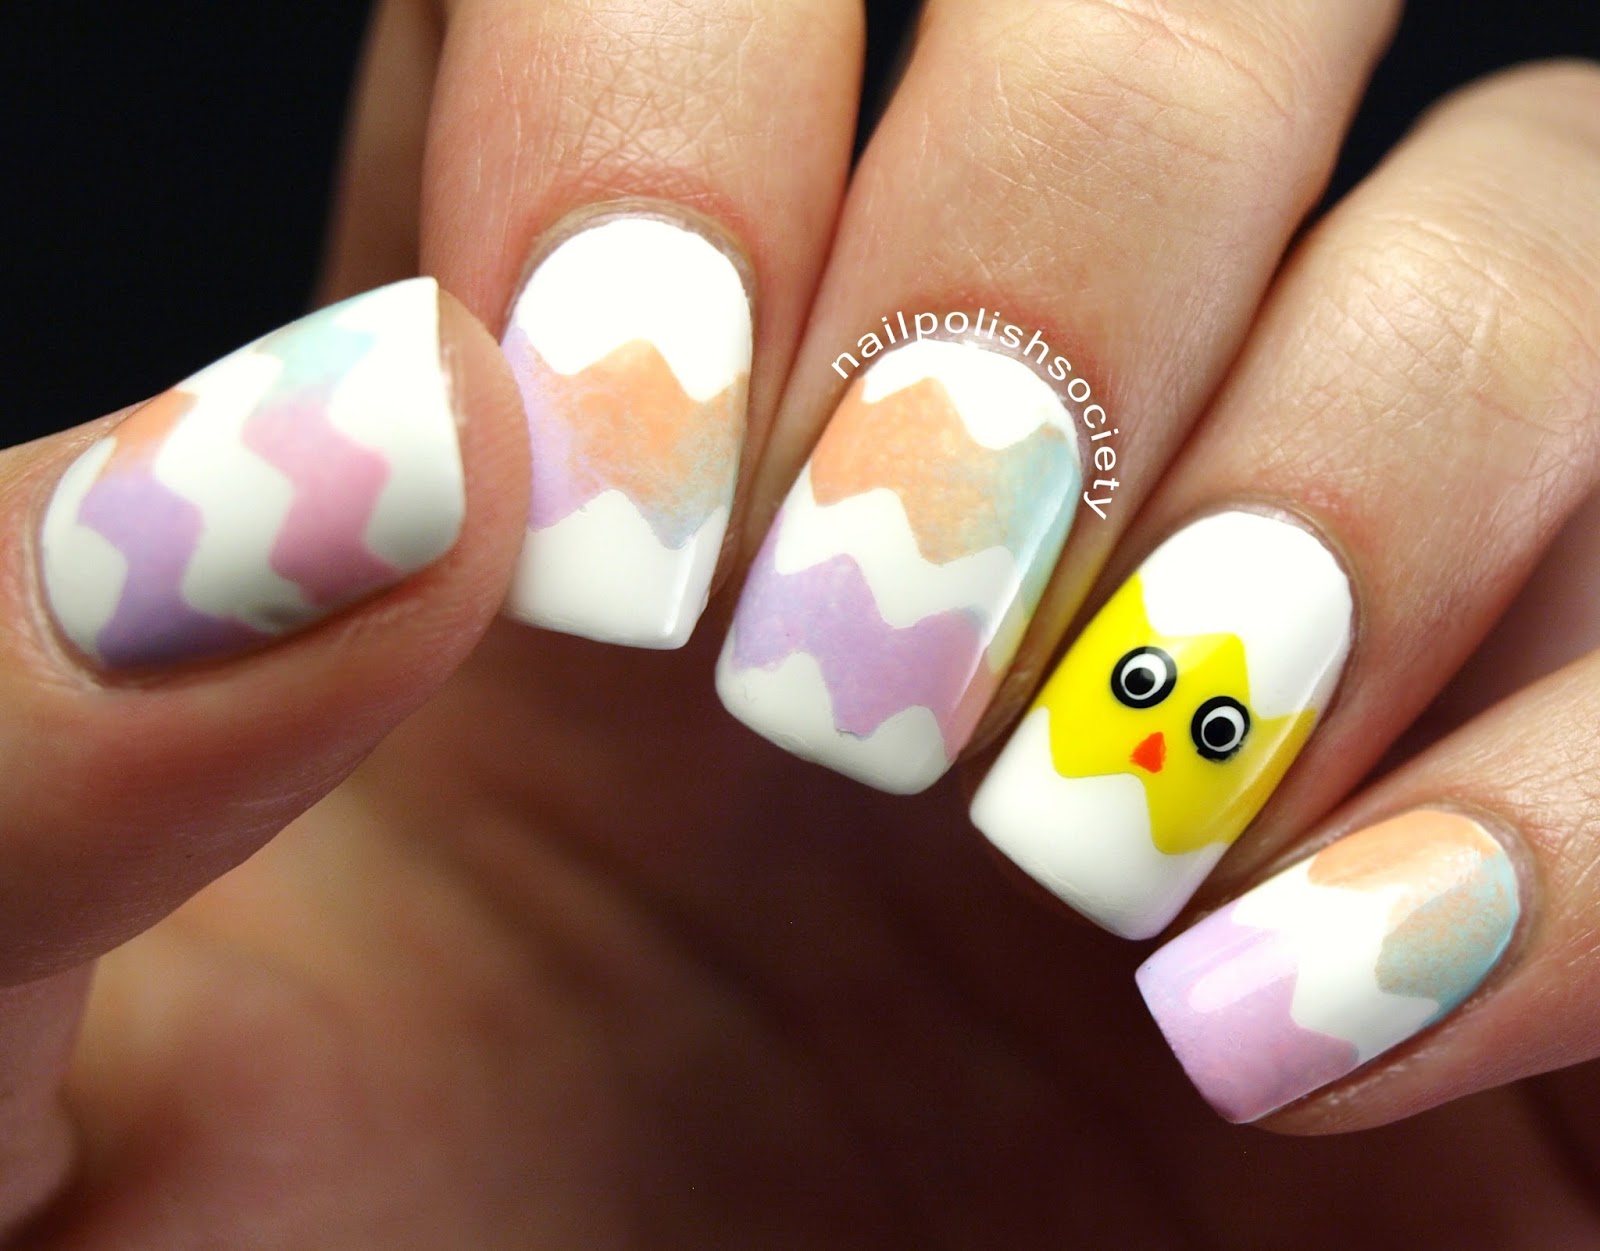 15 Of The Best Easter Nail Designs You Should See Today - fashionsy.com